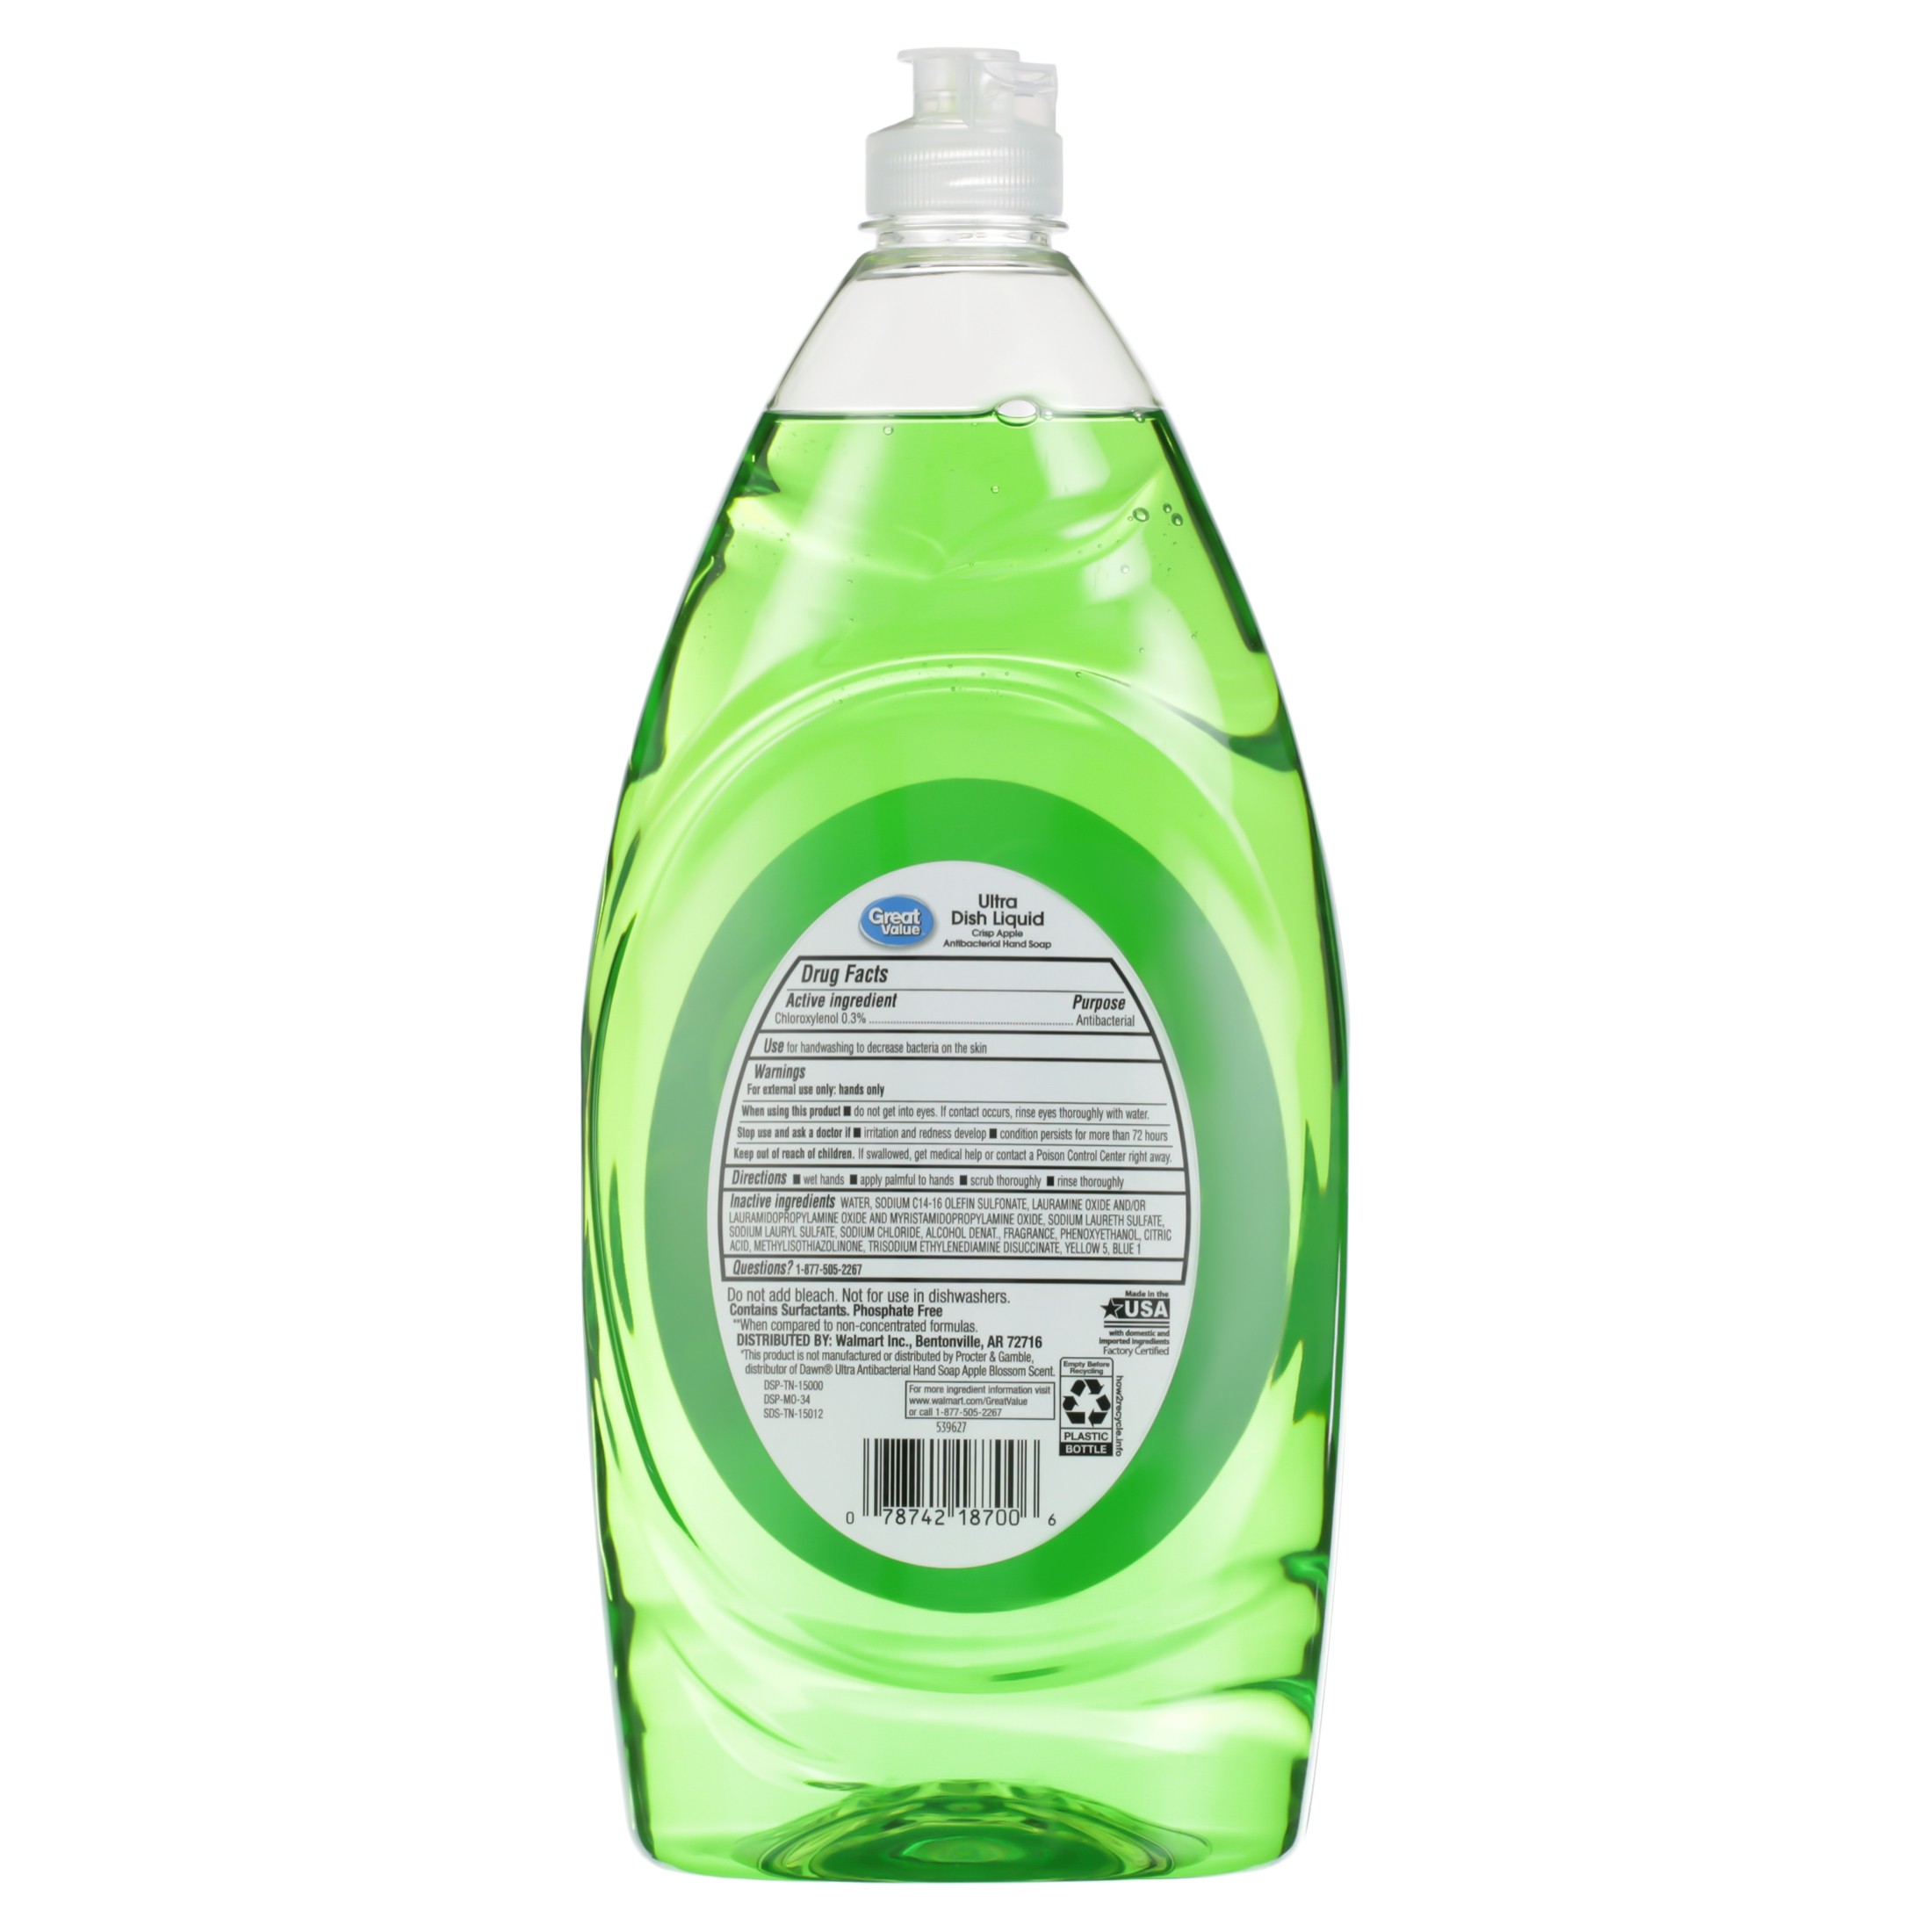 Great Value Liquid Dish Soap, Fruity Scent, 40 Fluid Ounce - image 5 of 7